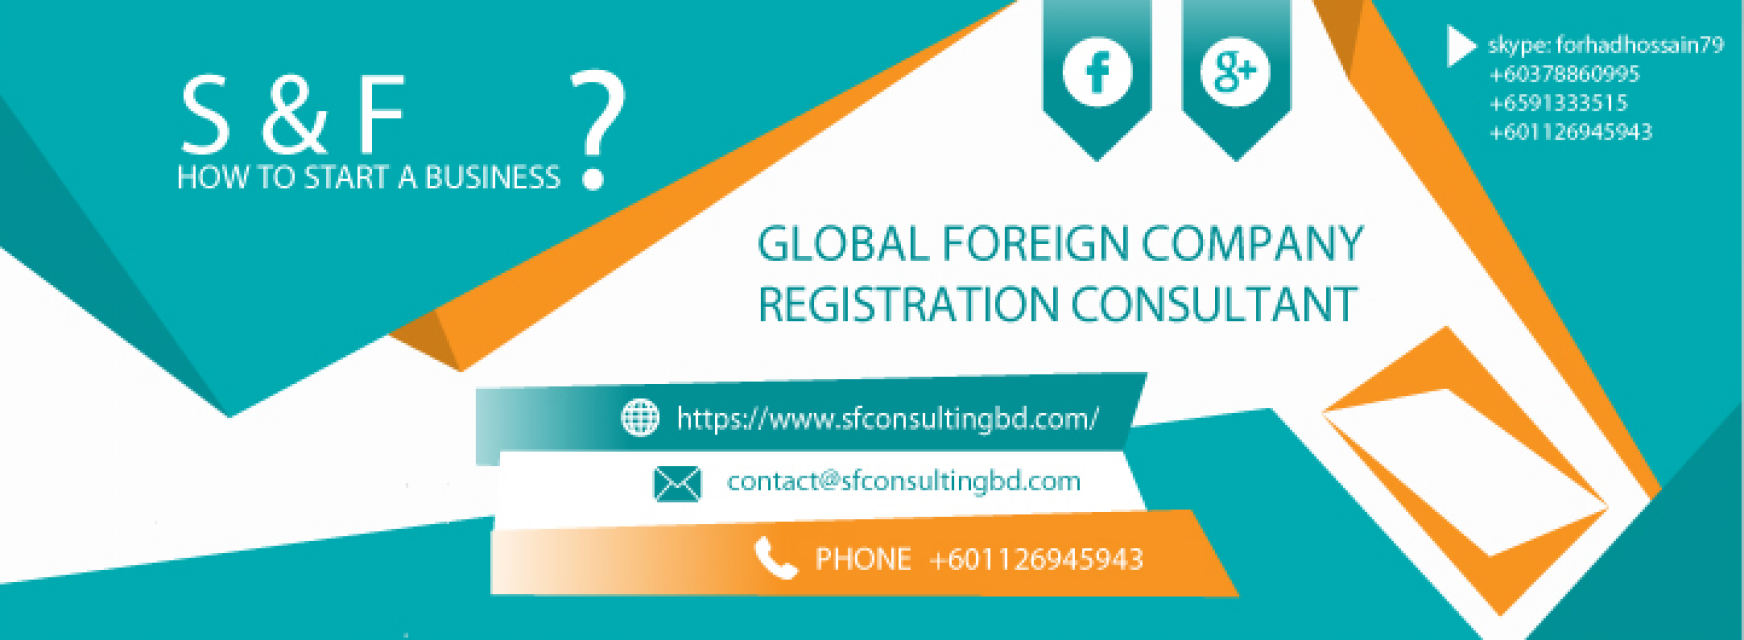 S&f Consulting Firm Ltd.